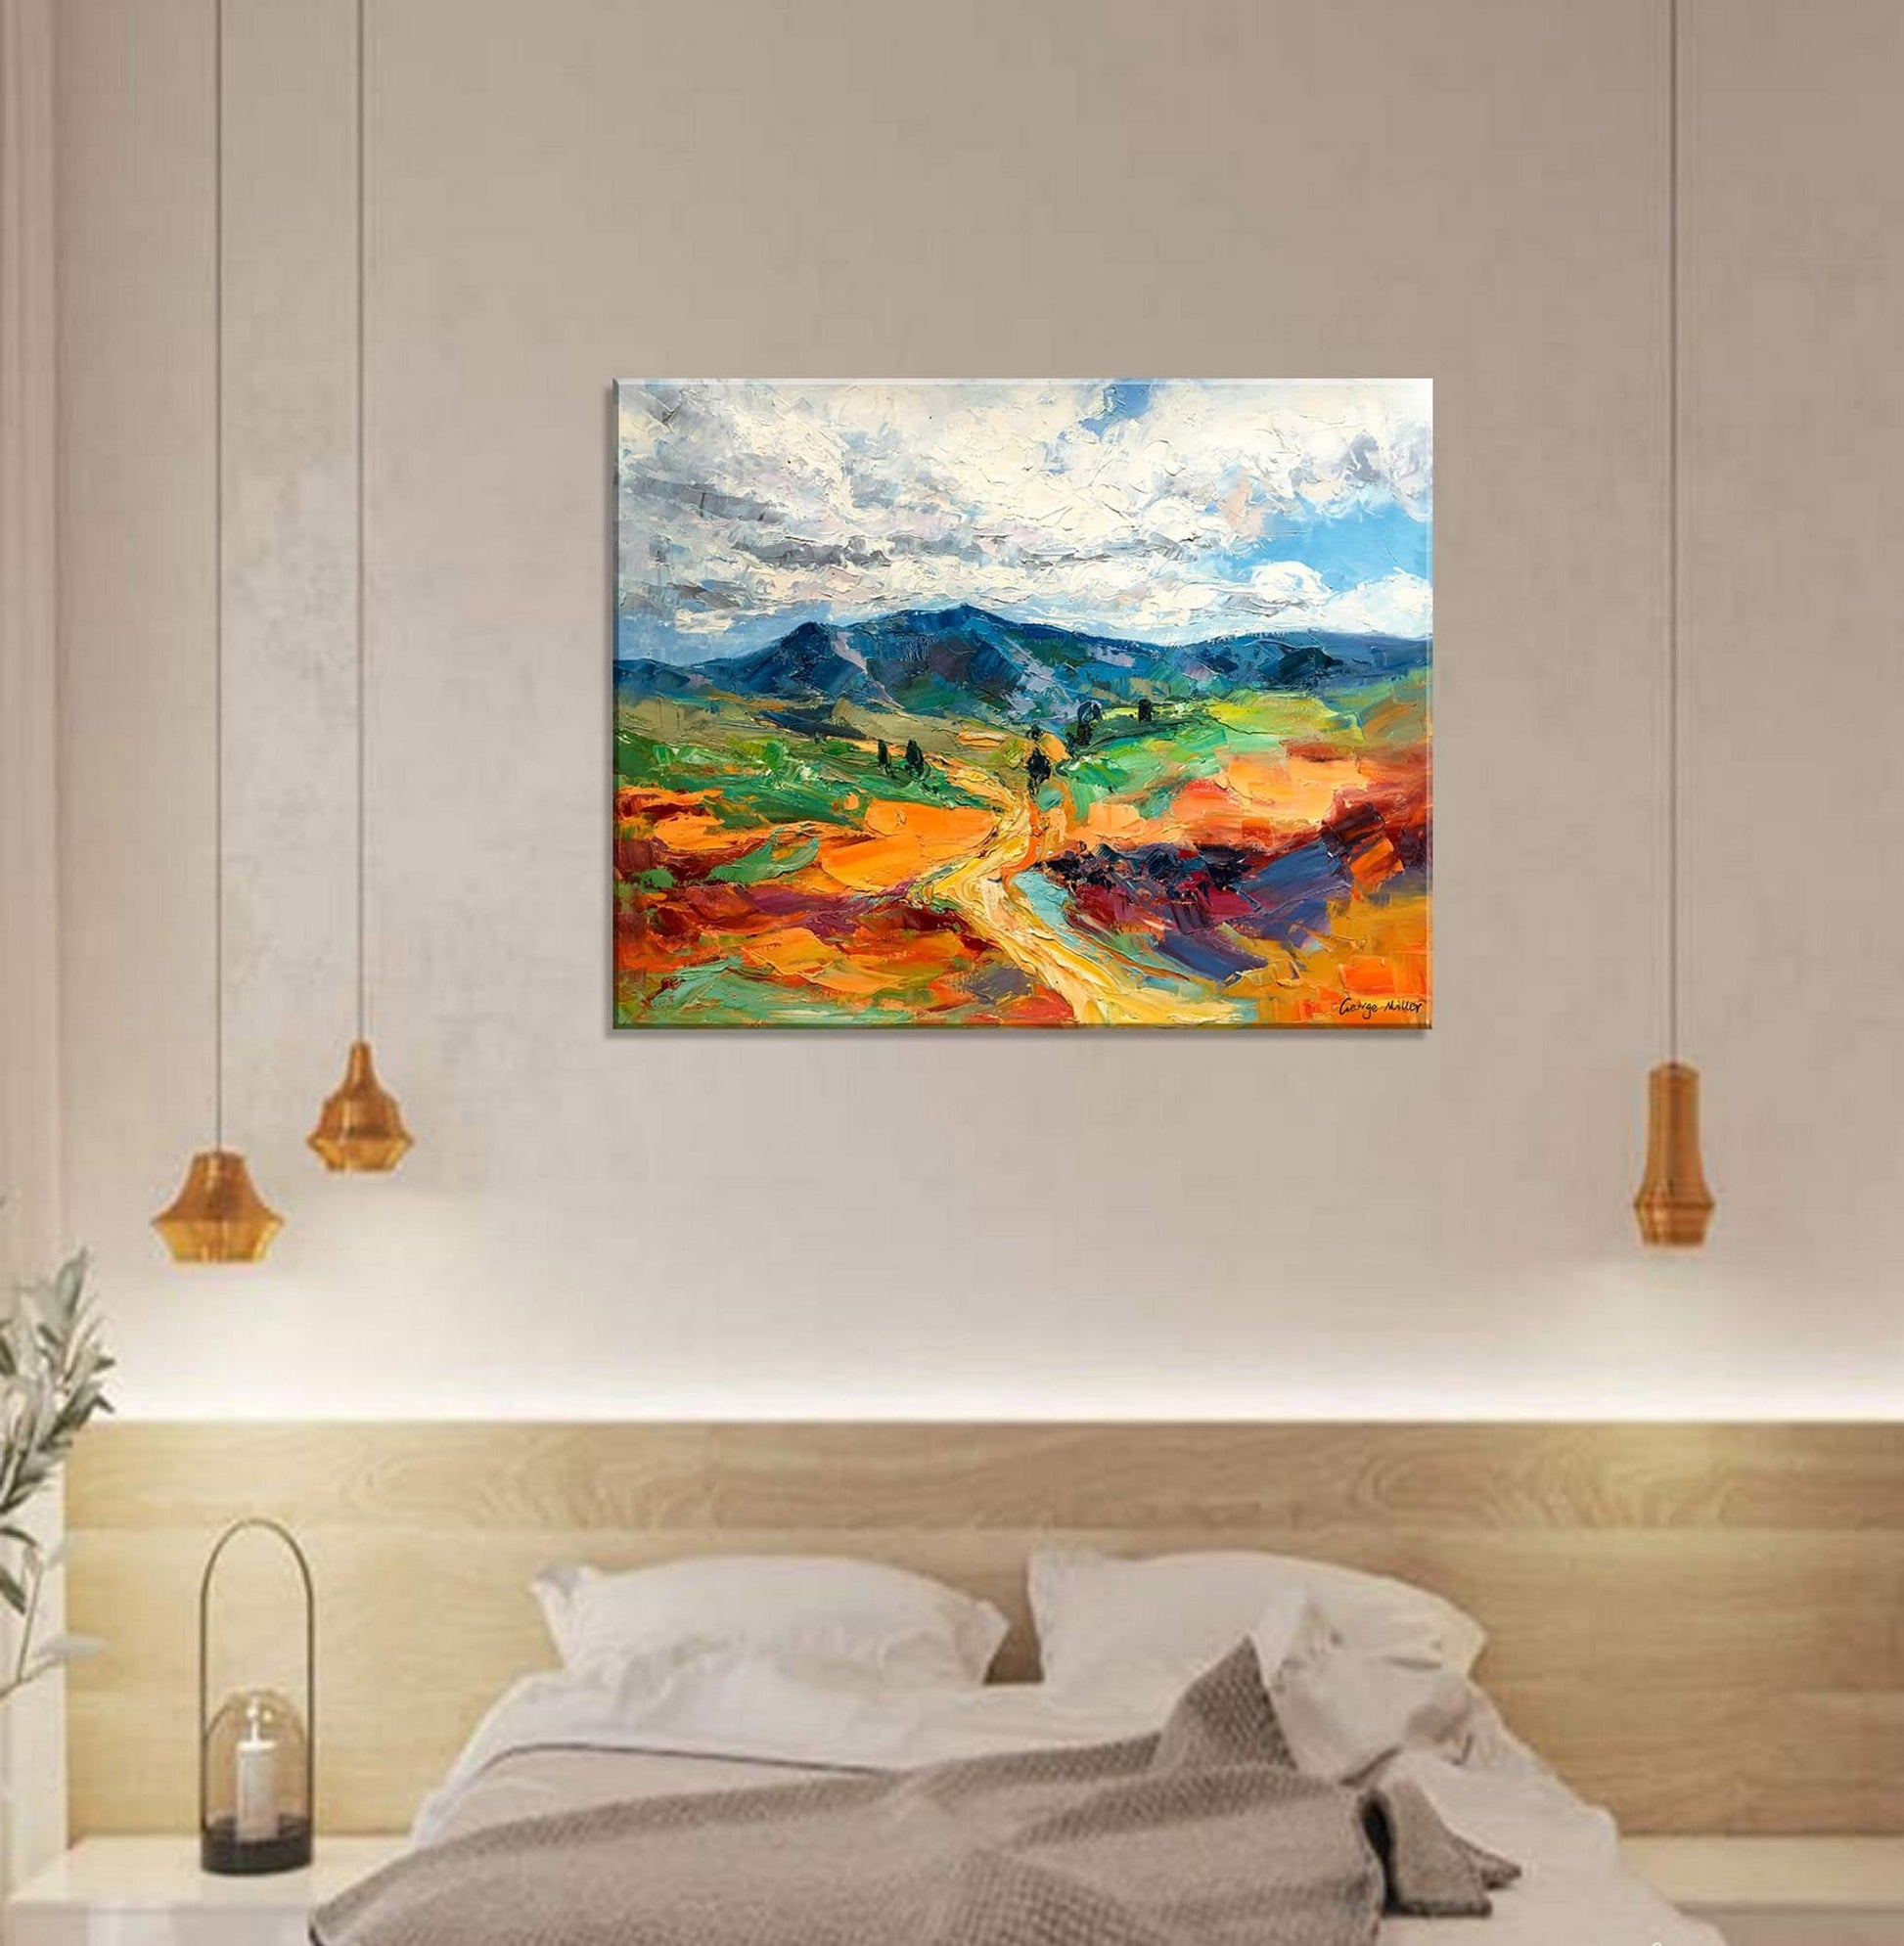 Abstract Painting Landscape with Mountains, Oil Painting, Abstract Canvas Art, Wall Decor, Abstract Wall Art, Bedroom Decor